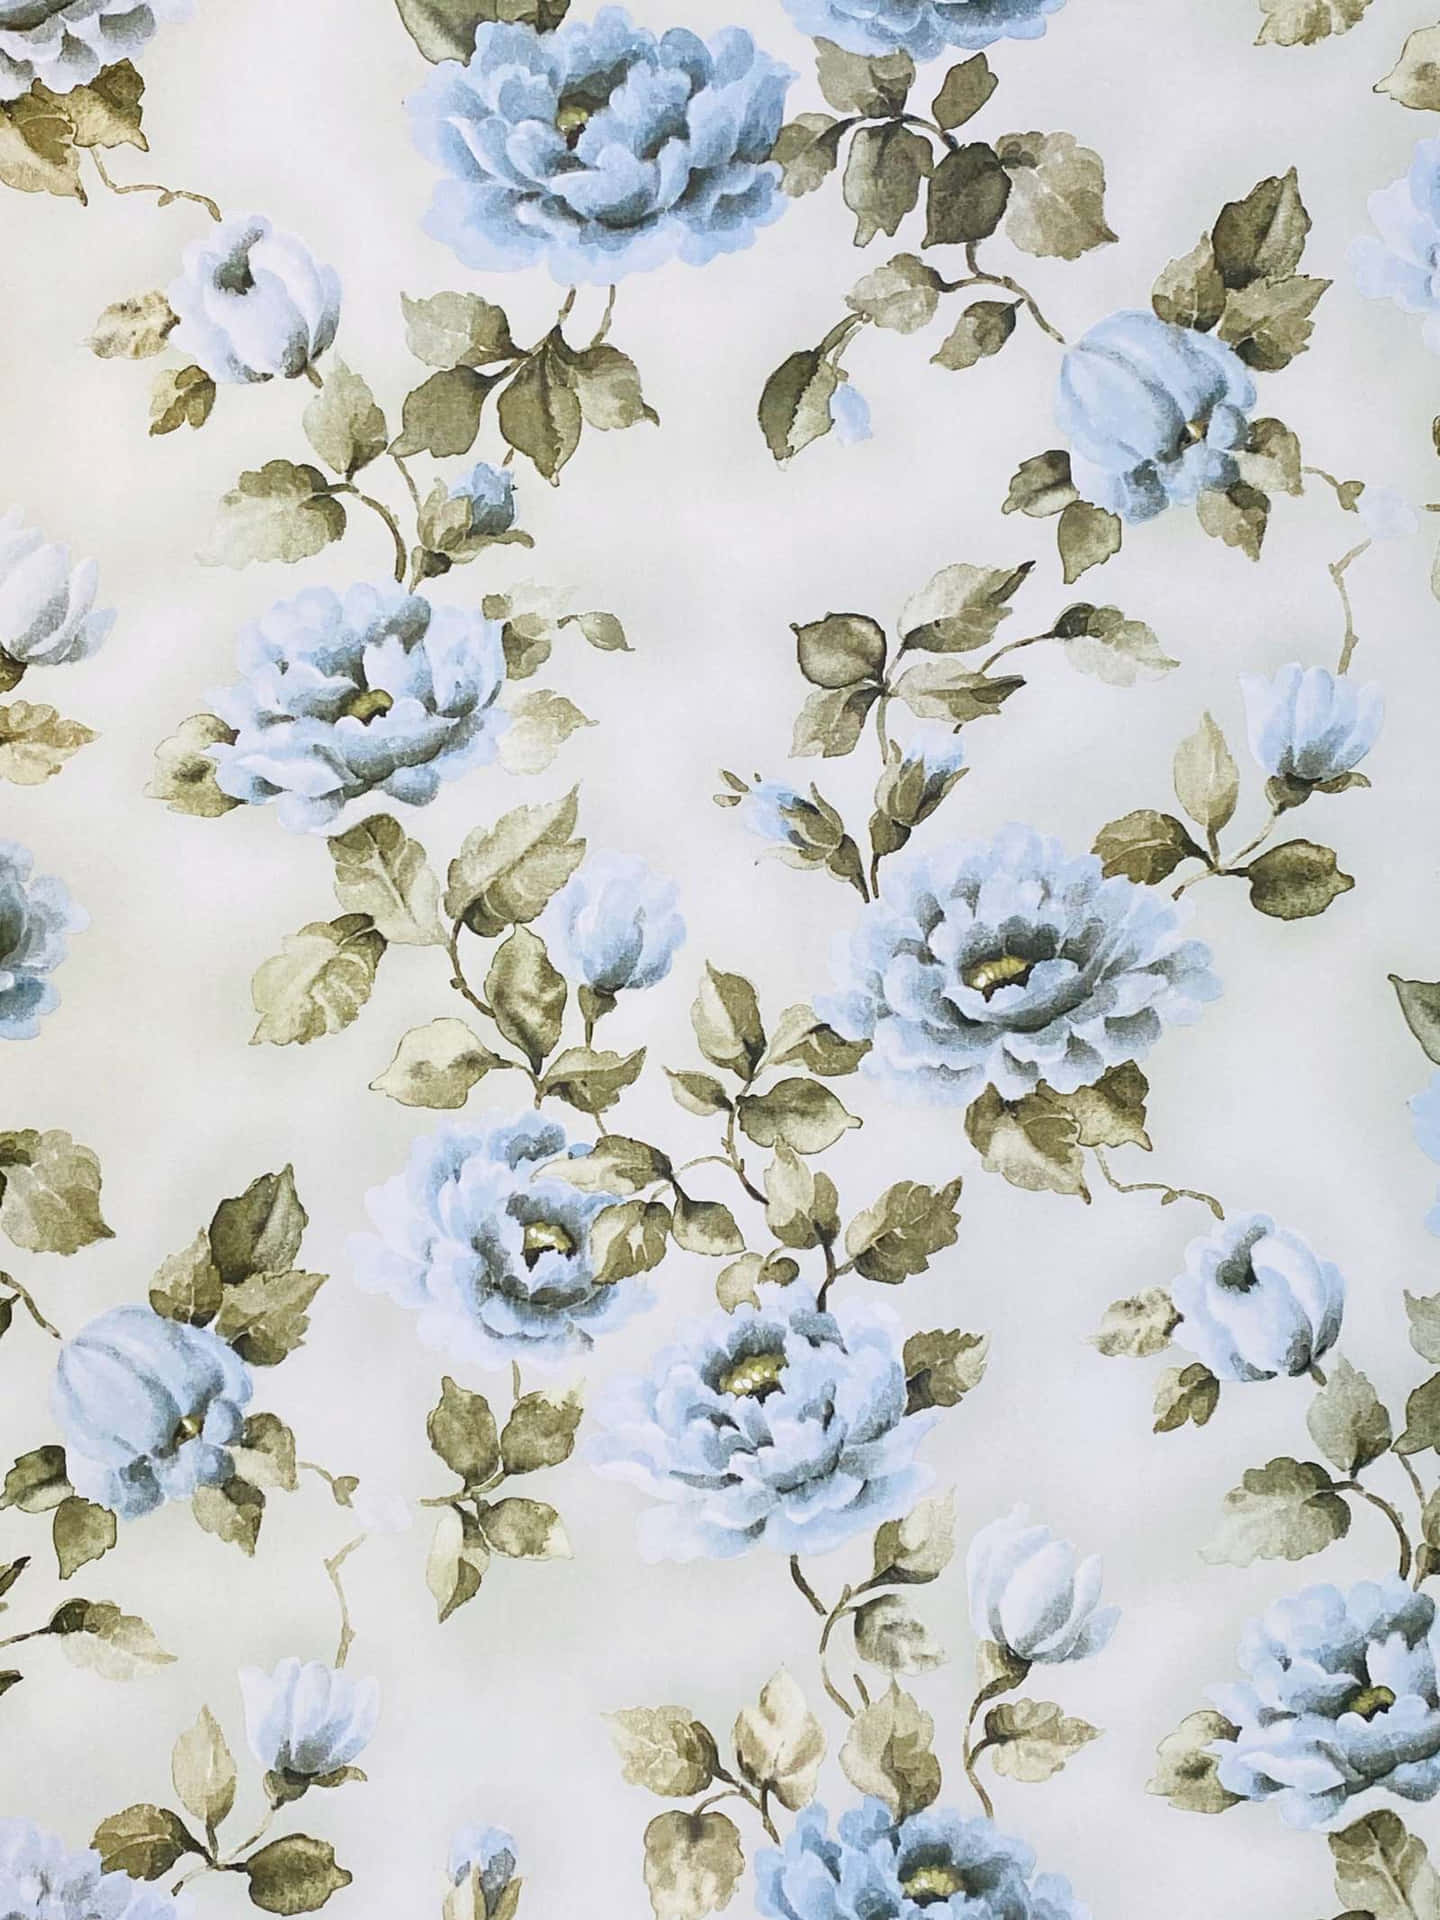 Delicate yet bold blue flowers dancing in the wind. Wallpaper